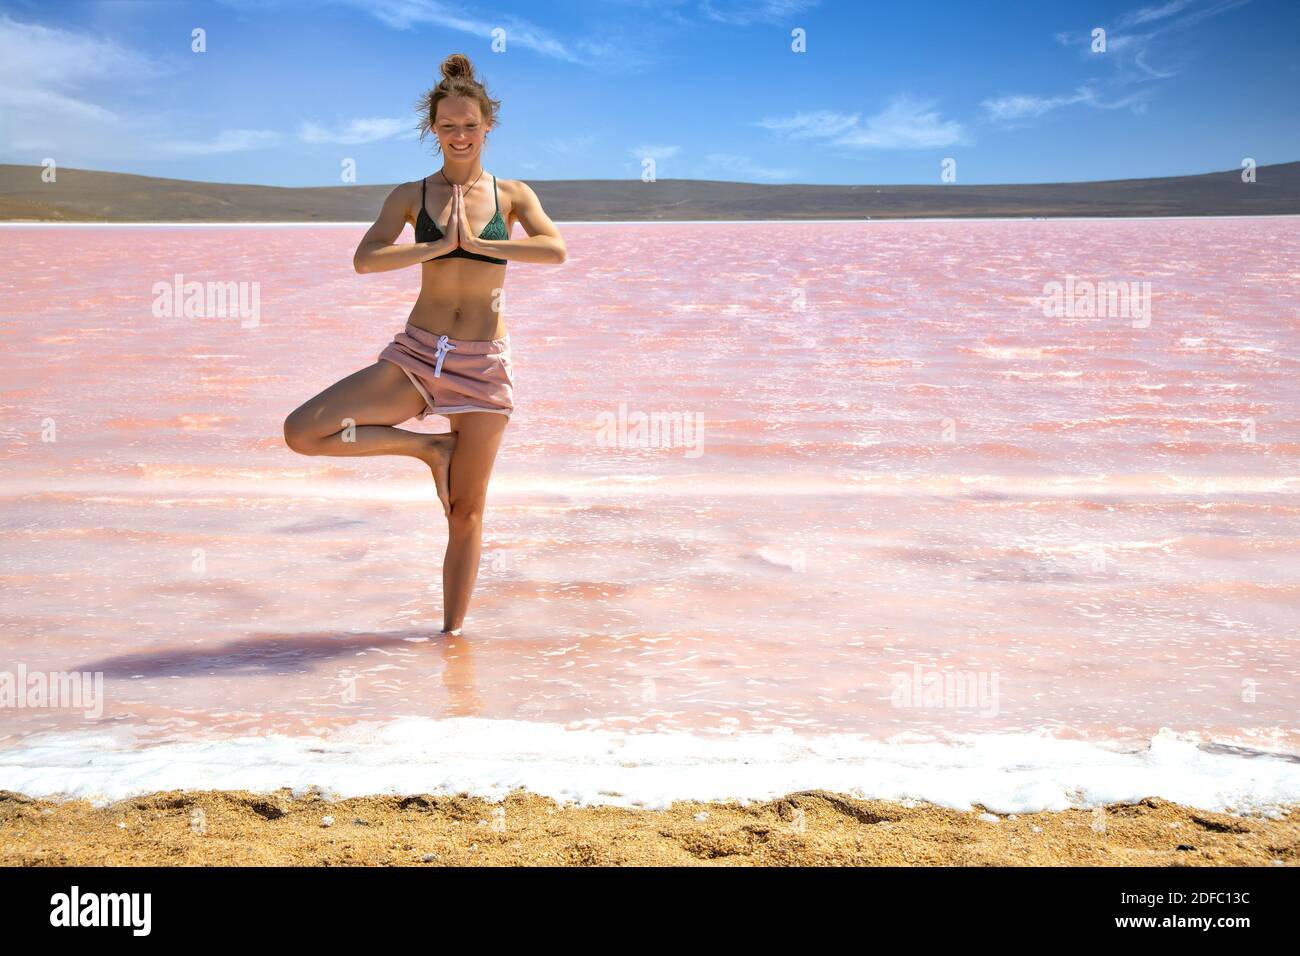 Young elegant woman doing meditation, doing a yoga pose for balance standing on one leg in salty pink lake Stock Photo